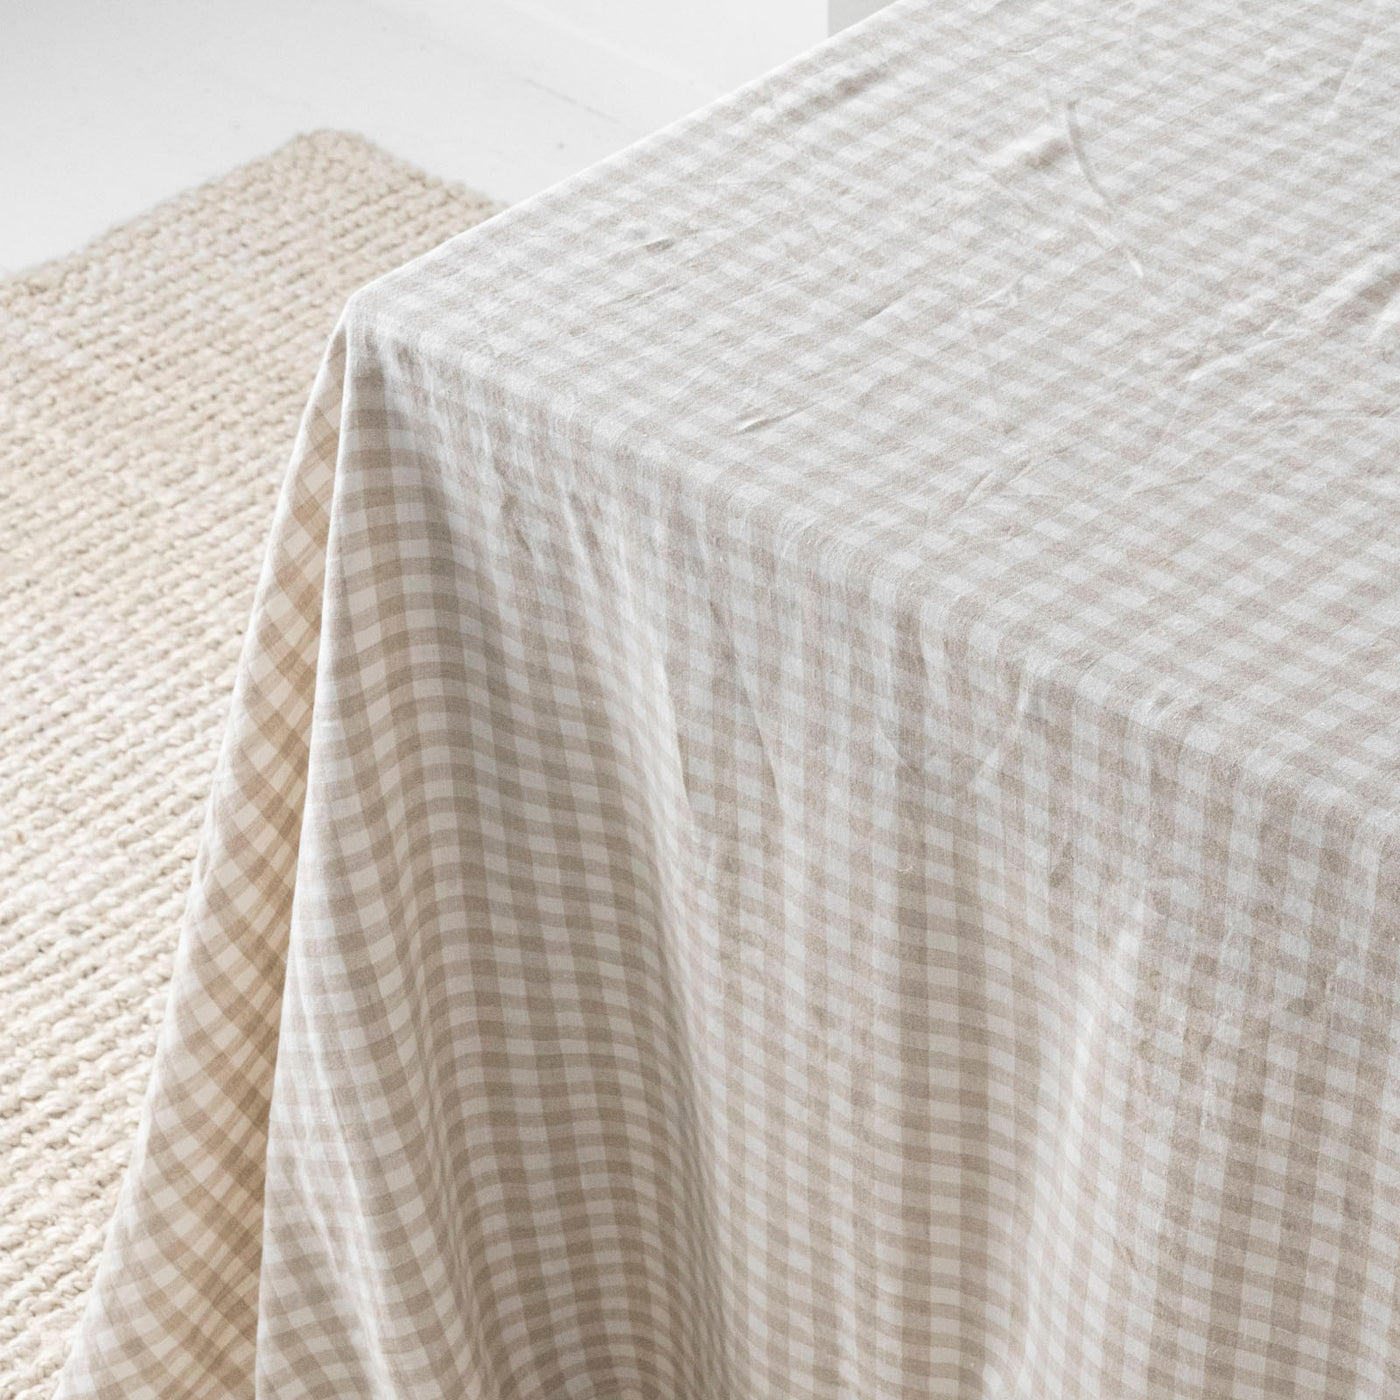 French Flax Linen Table Cloth in Beige Gingham